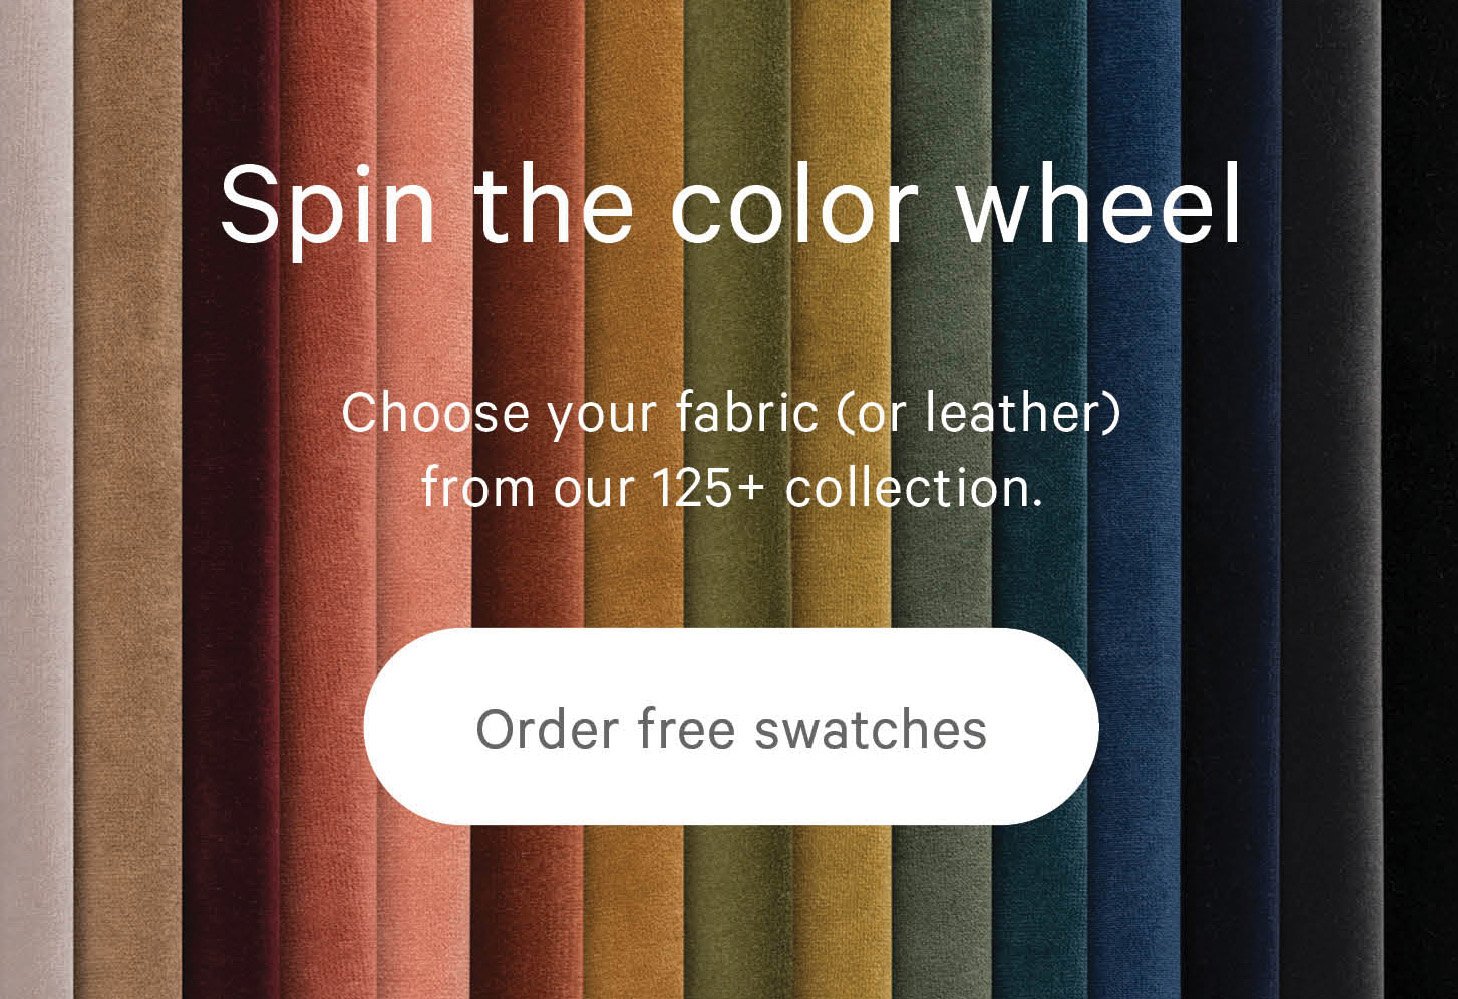 Order free swatches